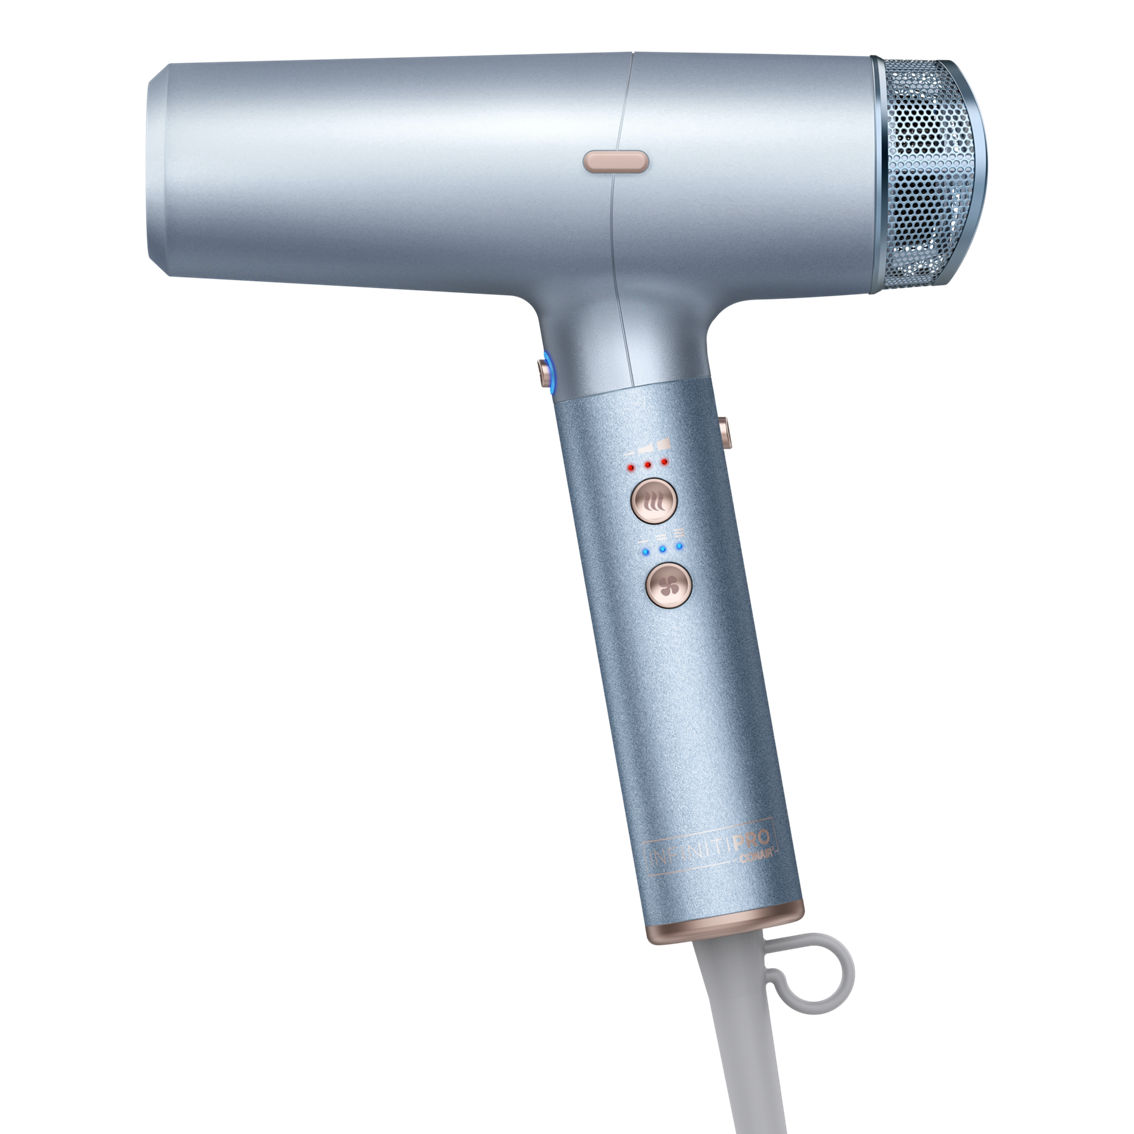 Conair InfPRO Digital Aire - Image 4 of 9